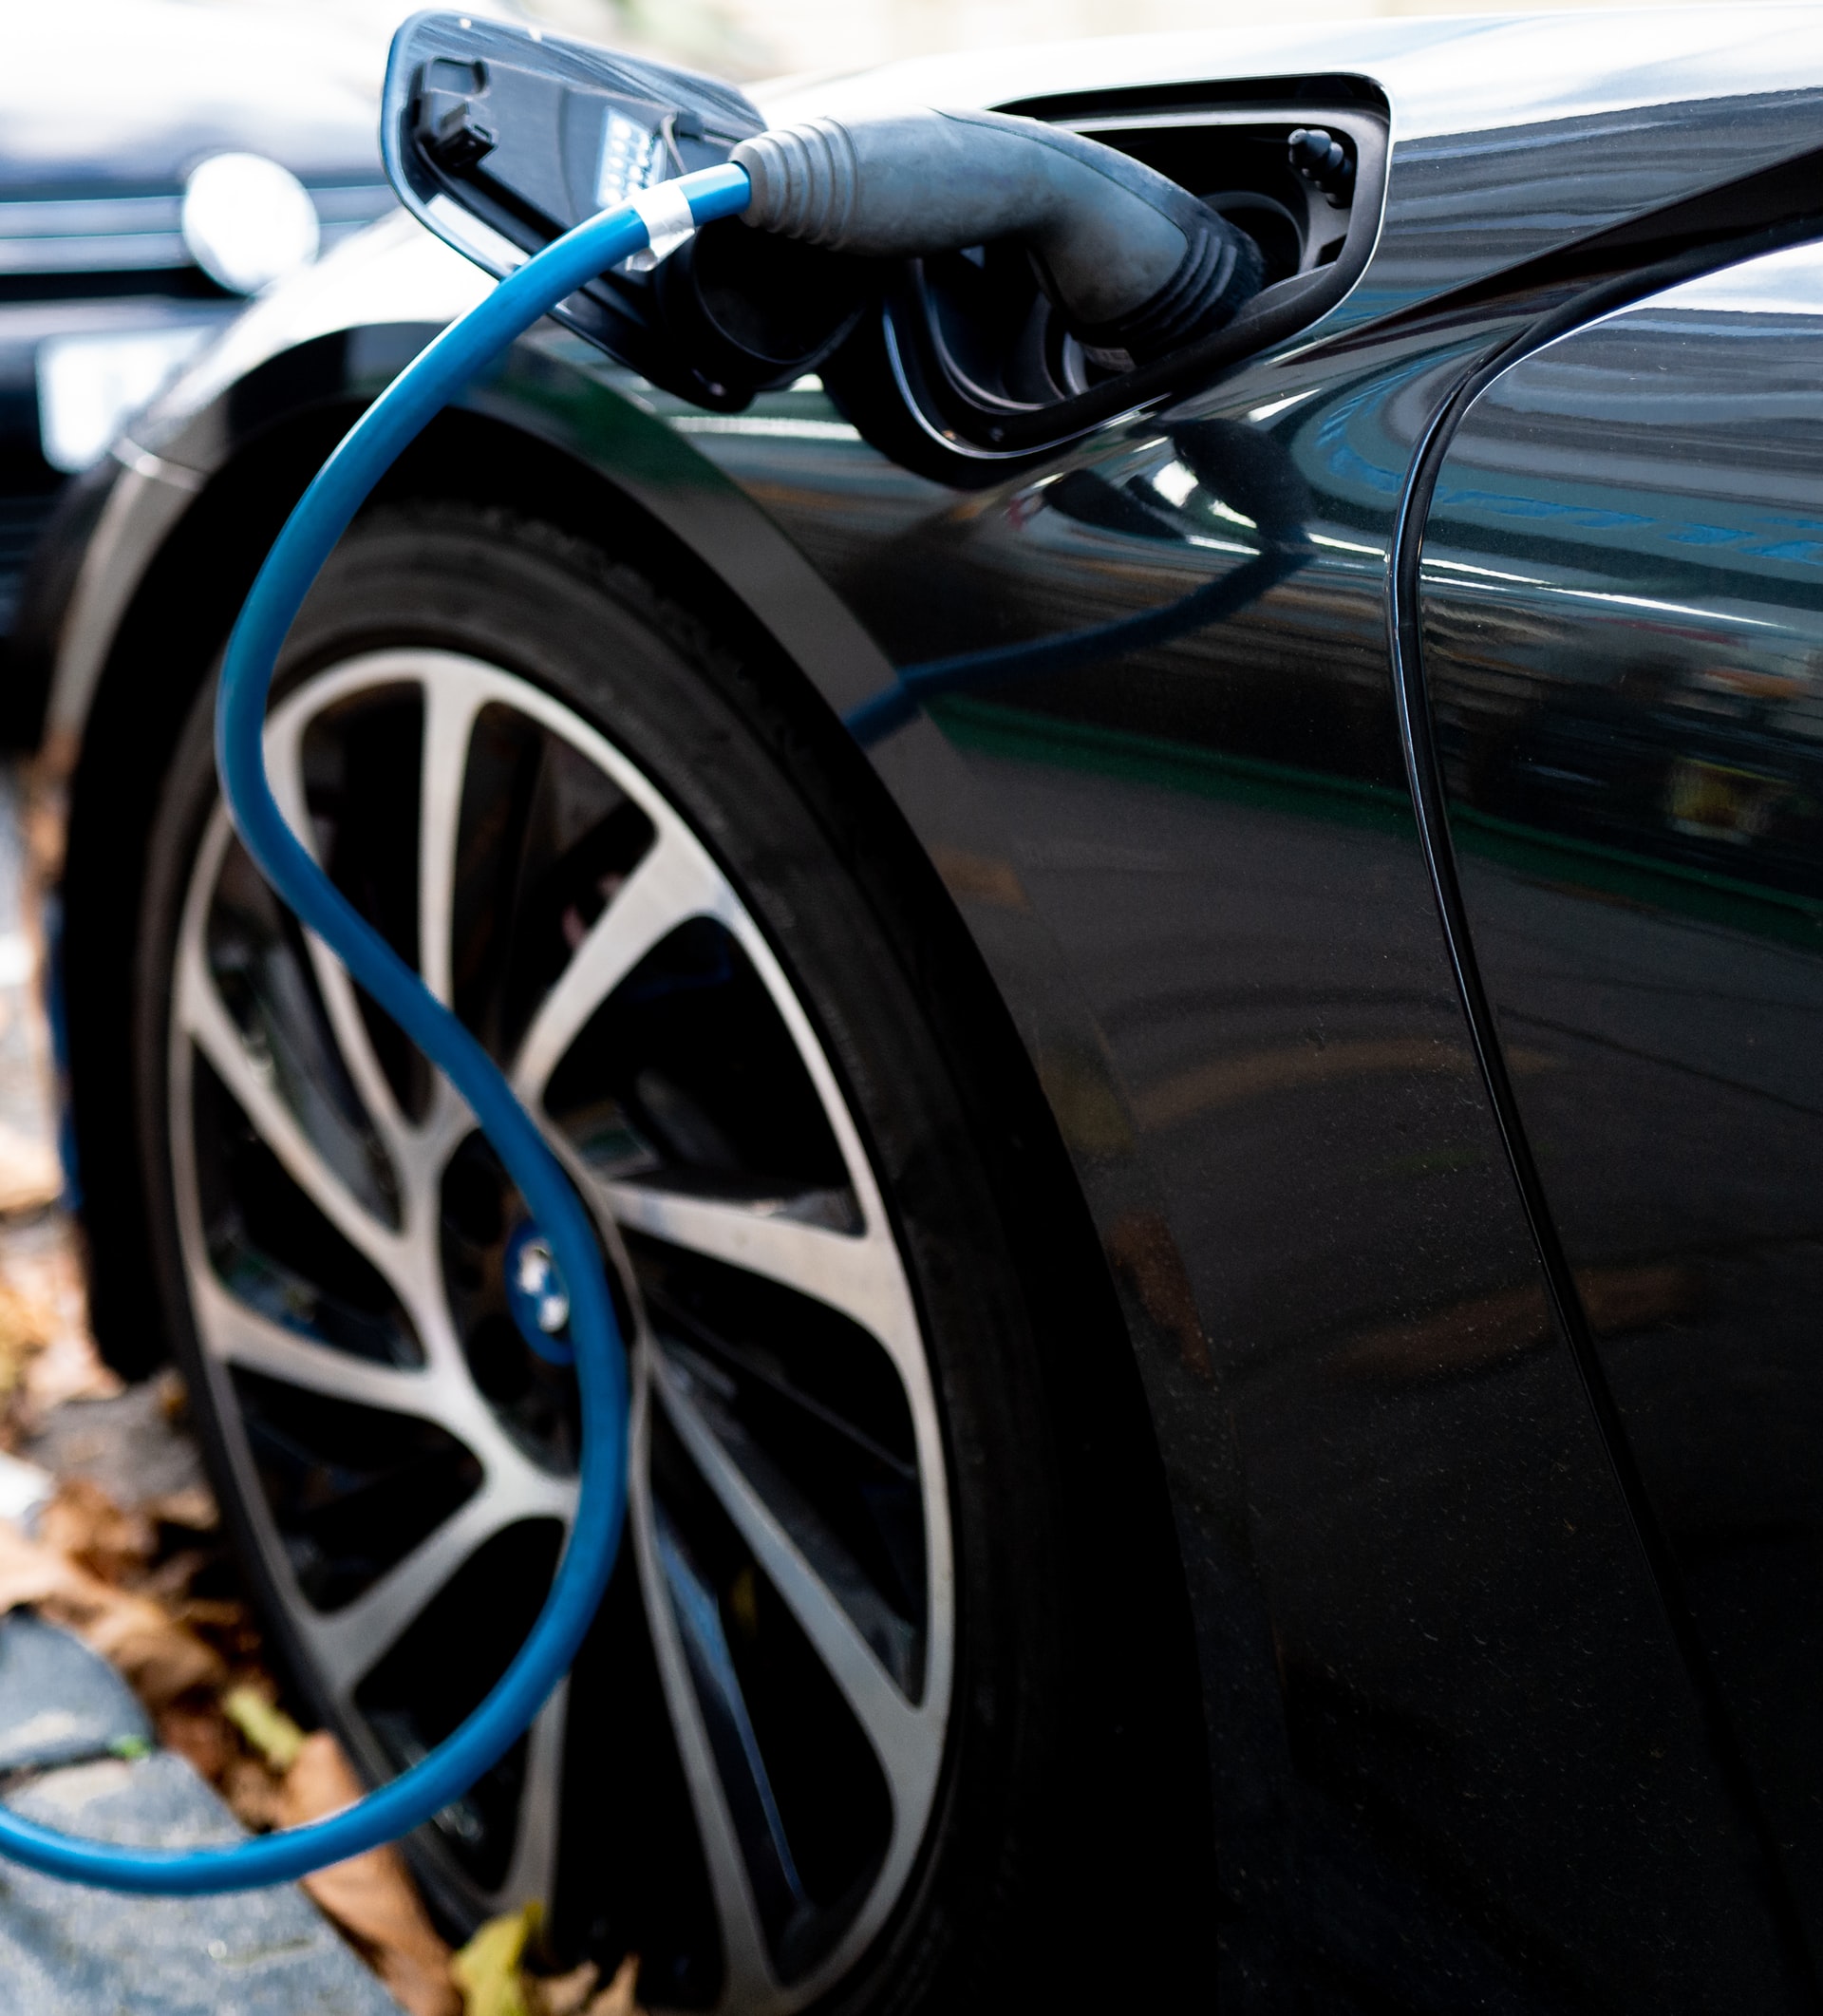 Electric Vehicles and the maintenance they need to perform consistently.